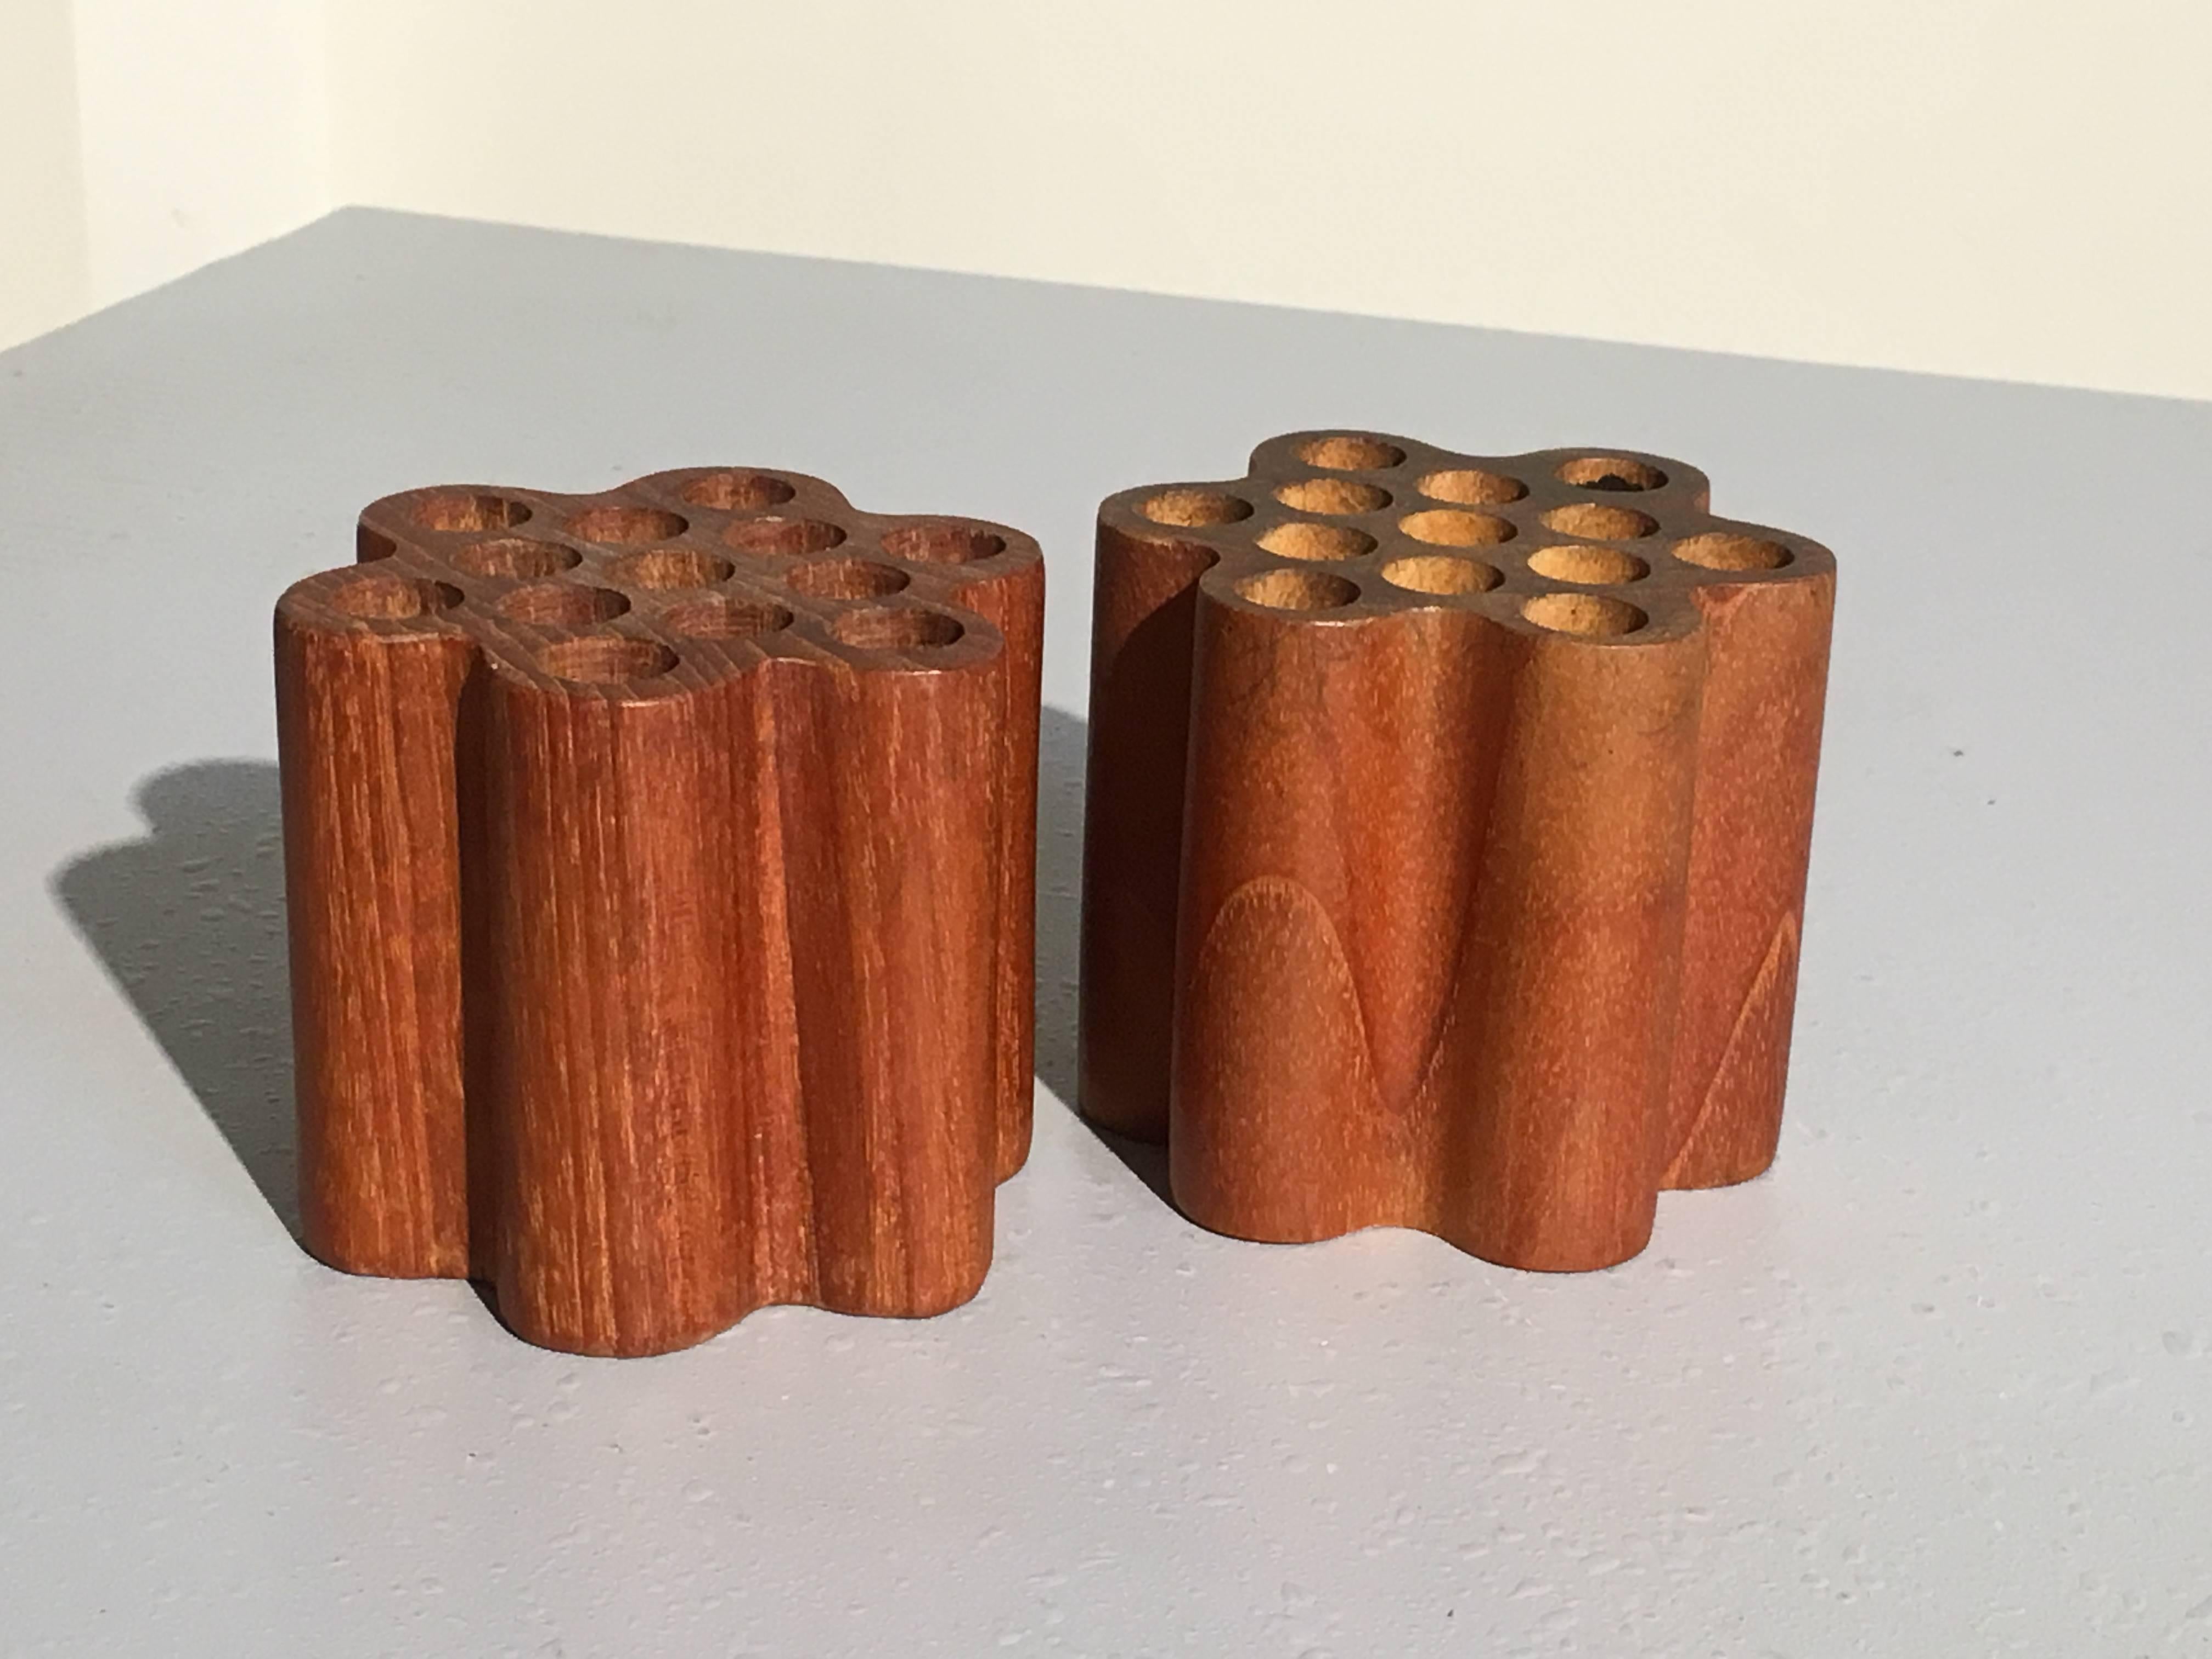 A pair of Swedish modernist pen or pencil holders originally made for and retailed by Bonniers, New York city. 
Carved of solid teak, the sleek and elegant design in the form of streamlined lotus pods or honeycombs. Each pod/comb capable of holding